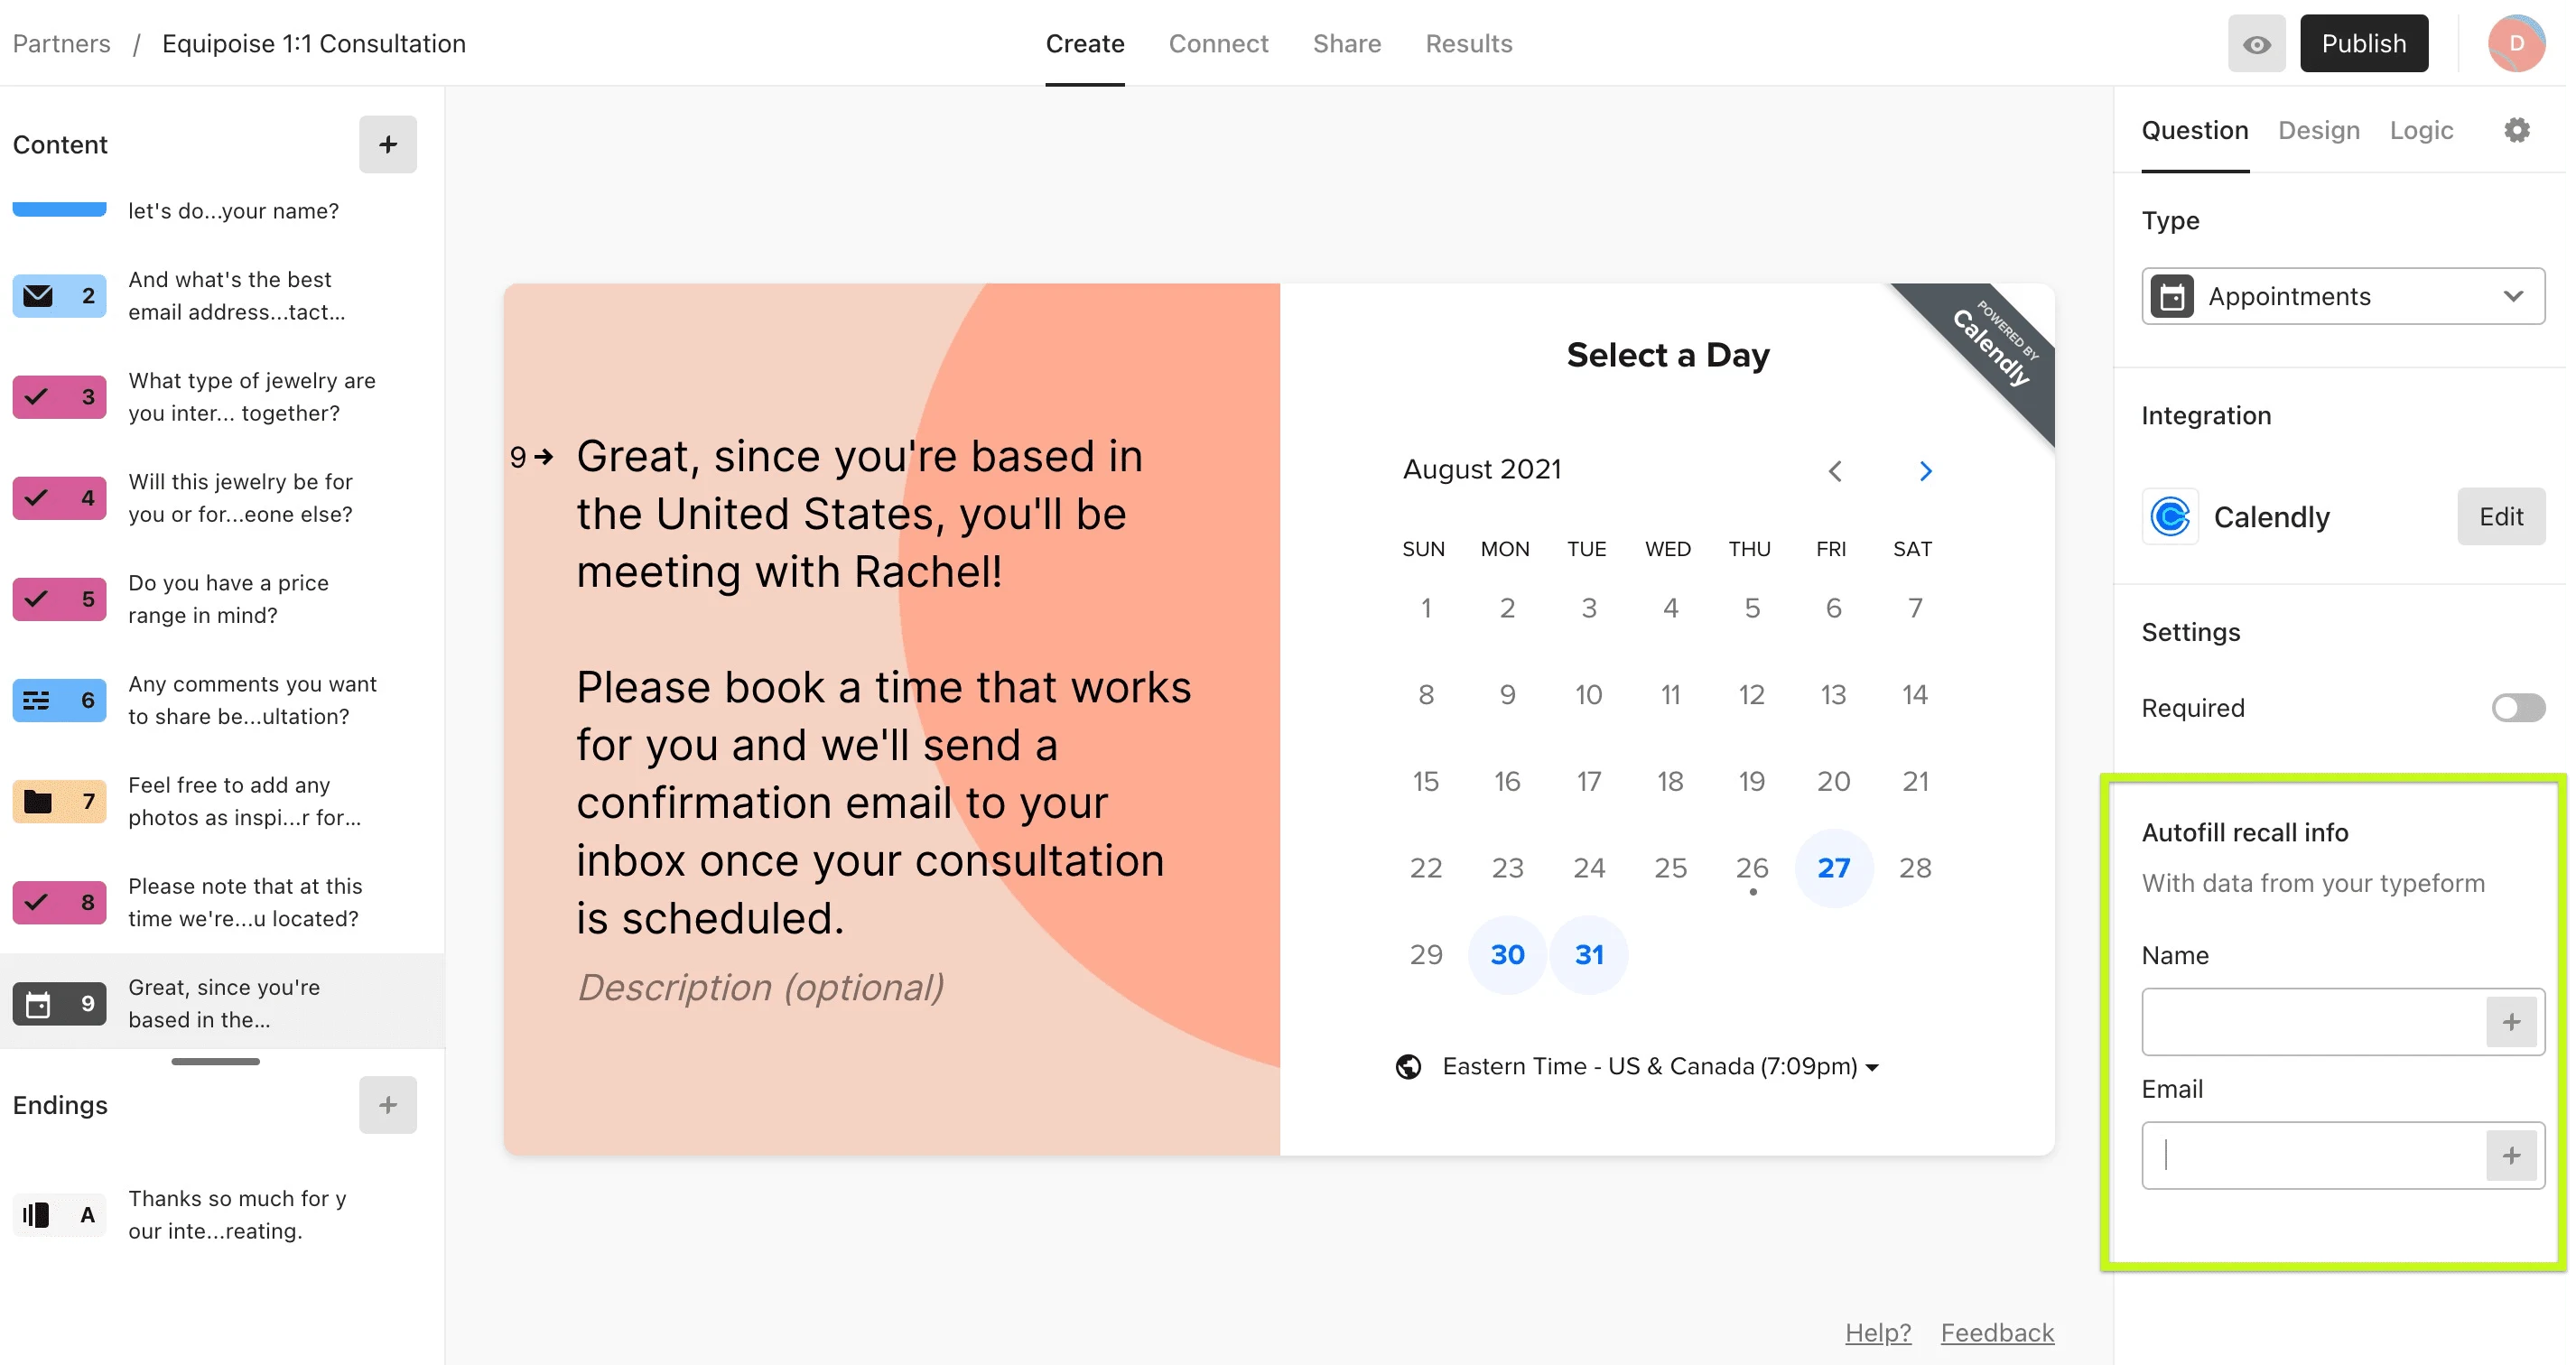 Typeform booking page example: "Great, since you're based in the U.S., you'll be meeting with Rachel! Please book a time that works for you and we'll send a confirmation email once your consultation is scheduled."